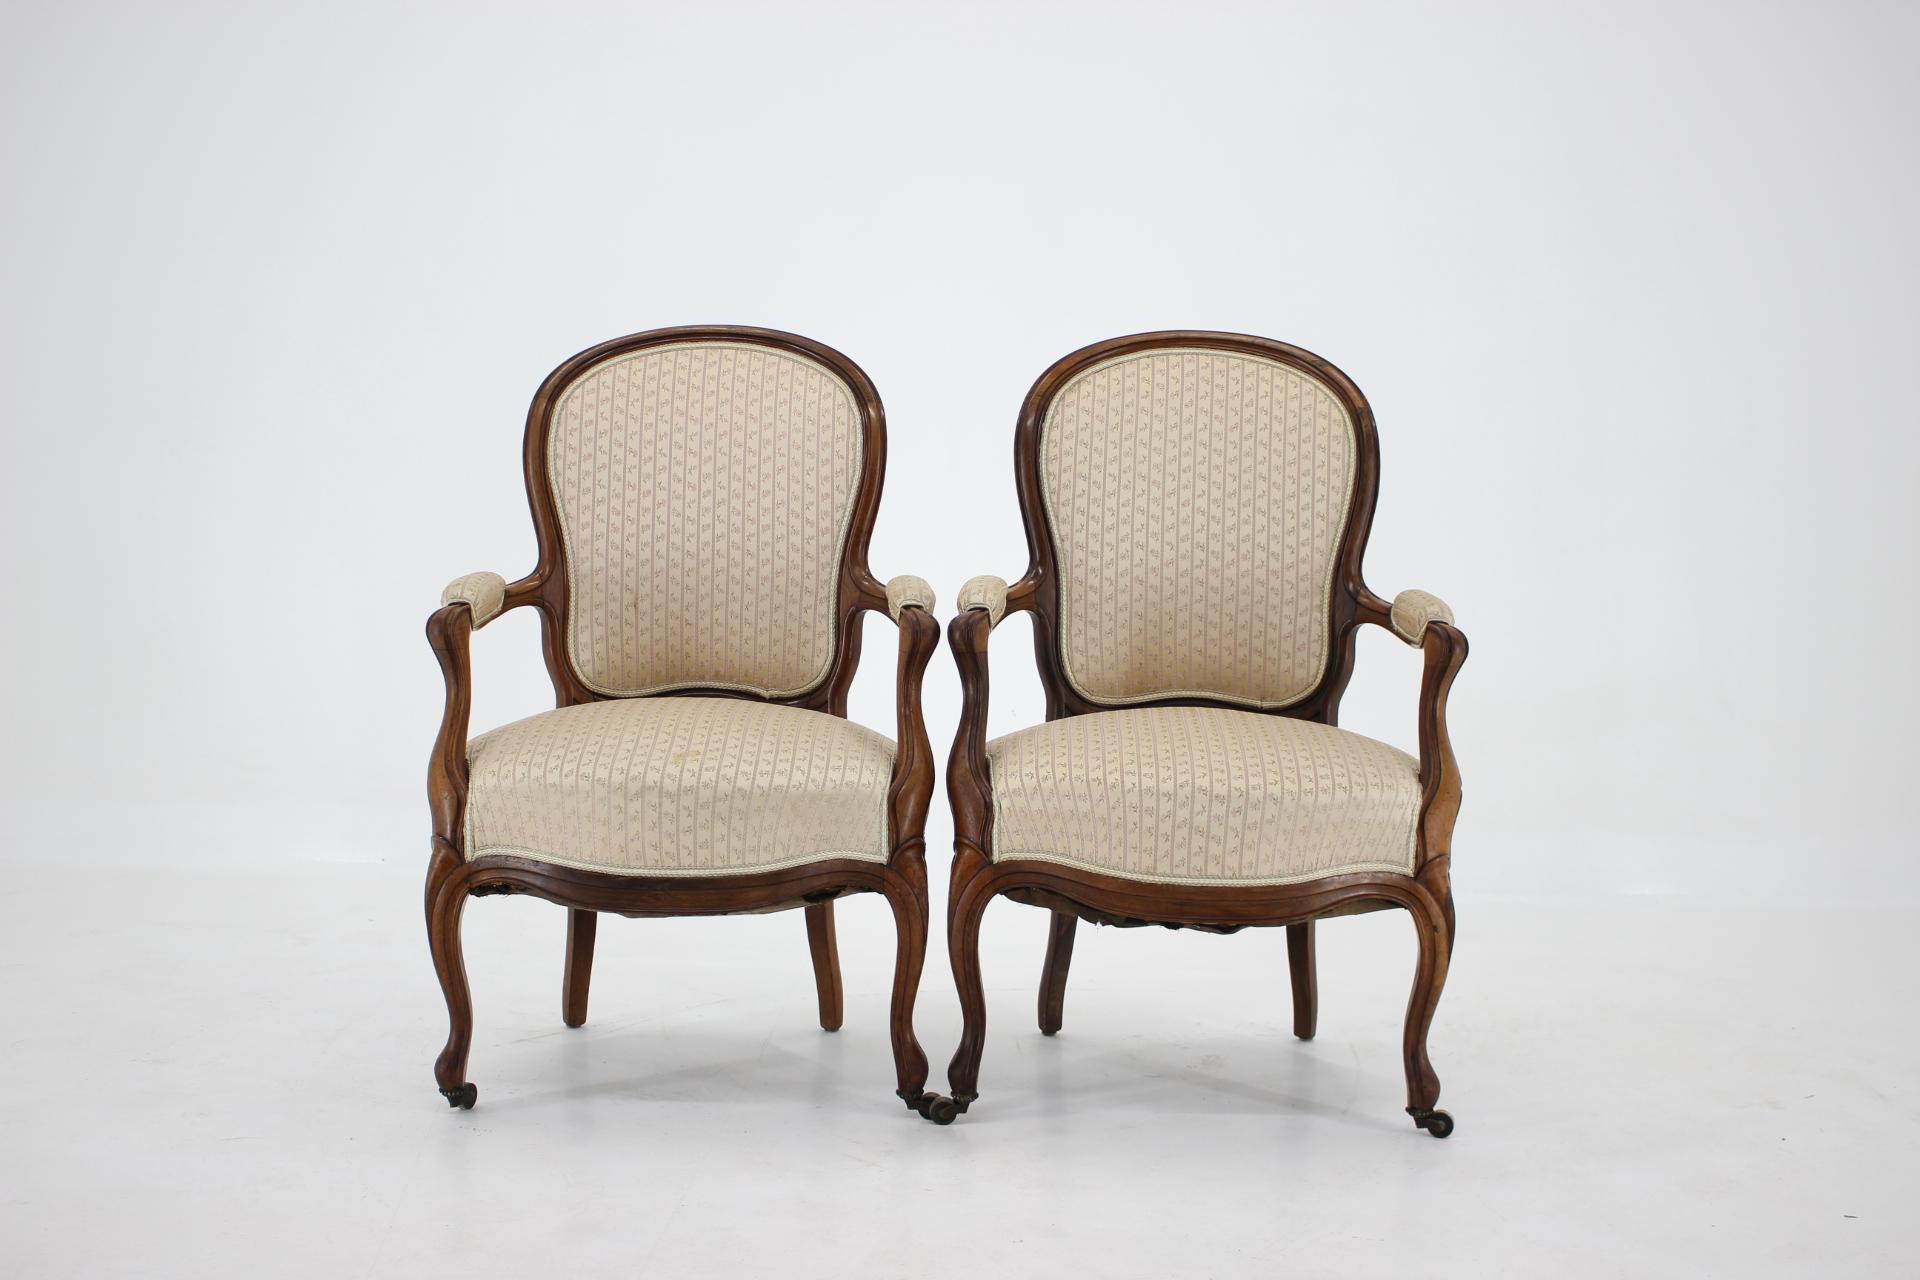 1900s Pair of Original Danish Rococo Chairs In Good Condition For Sale In Praha, CZ